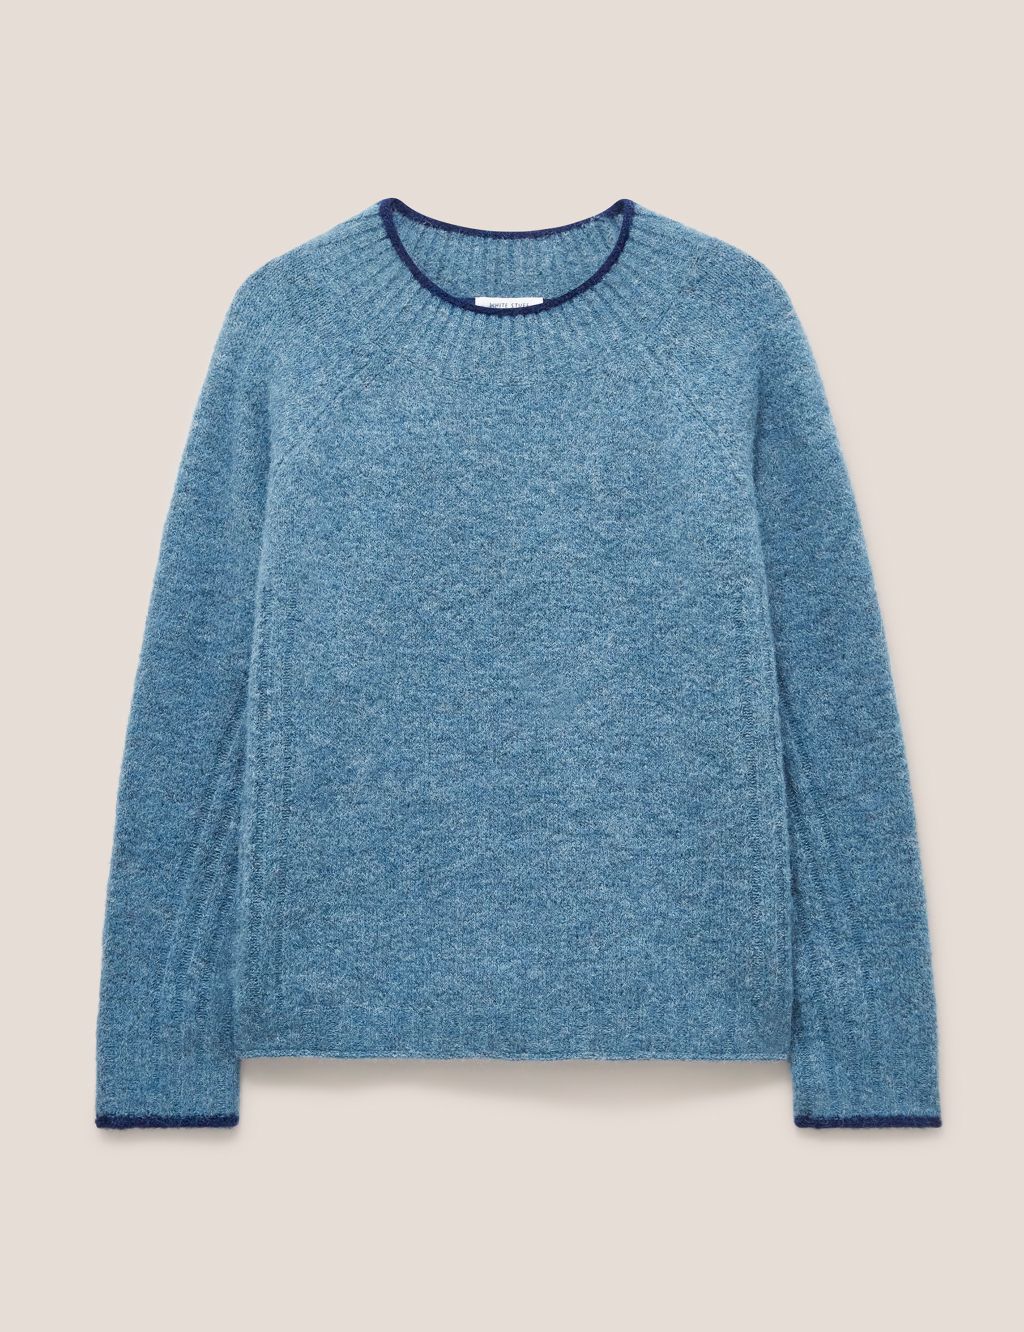 Textured Crew Neck Jumper with Wool image 2